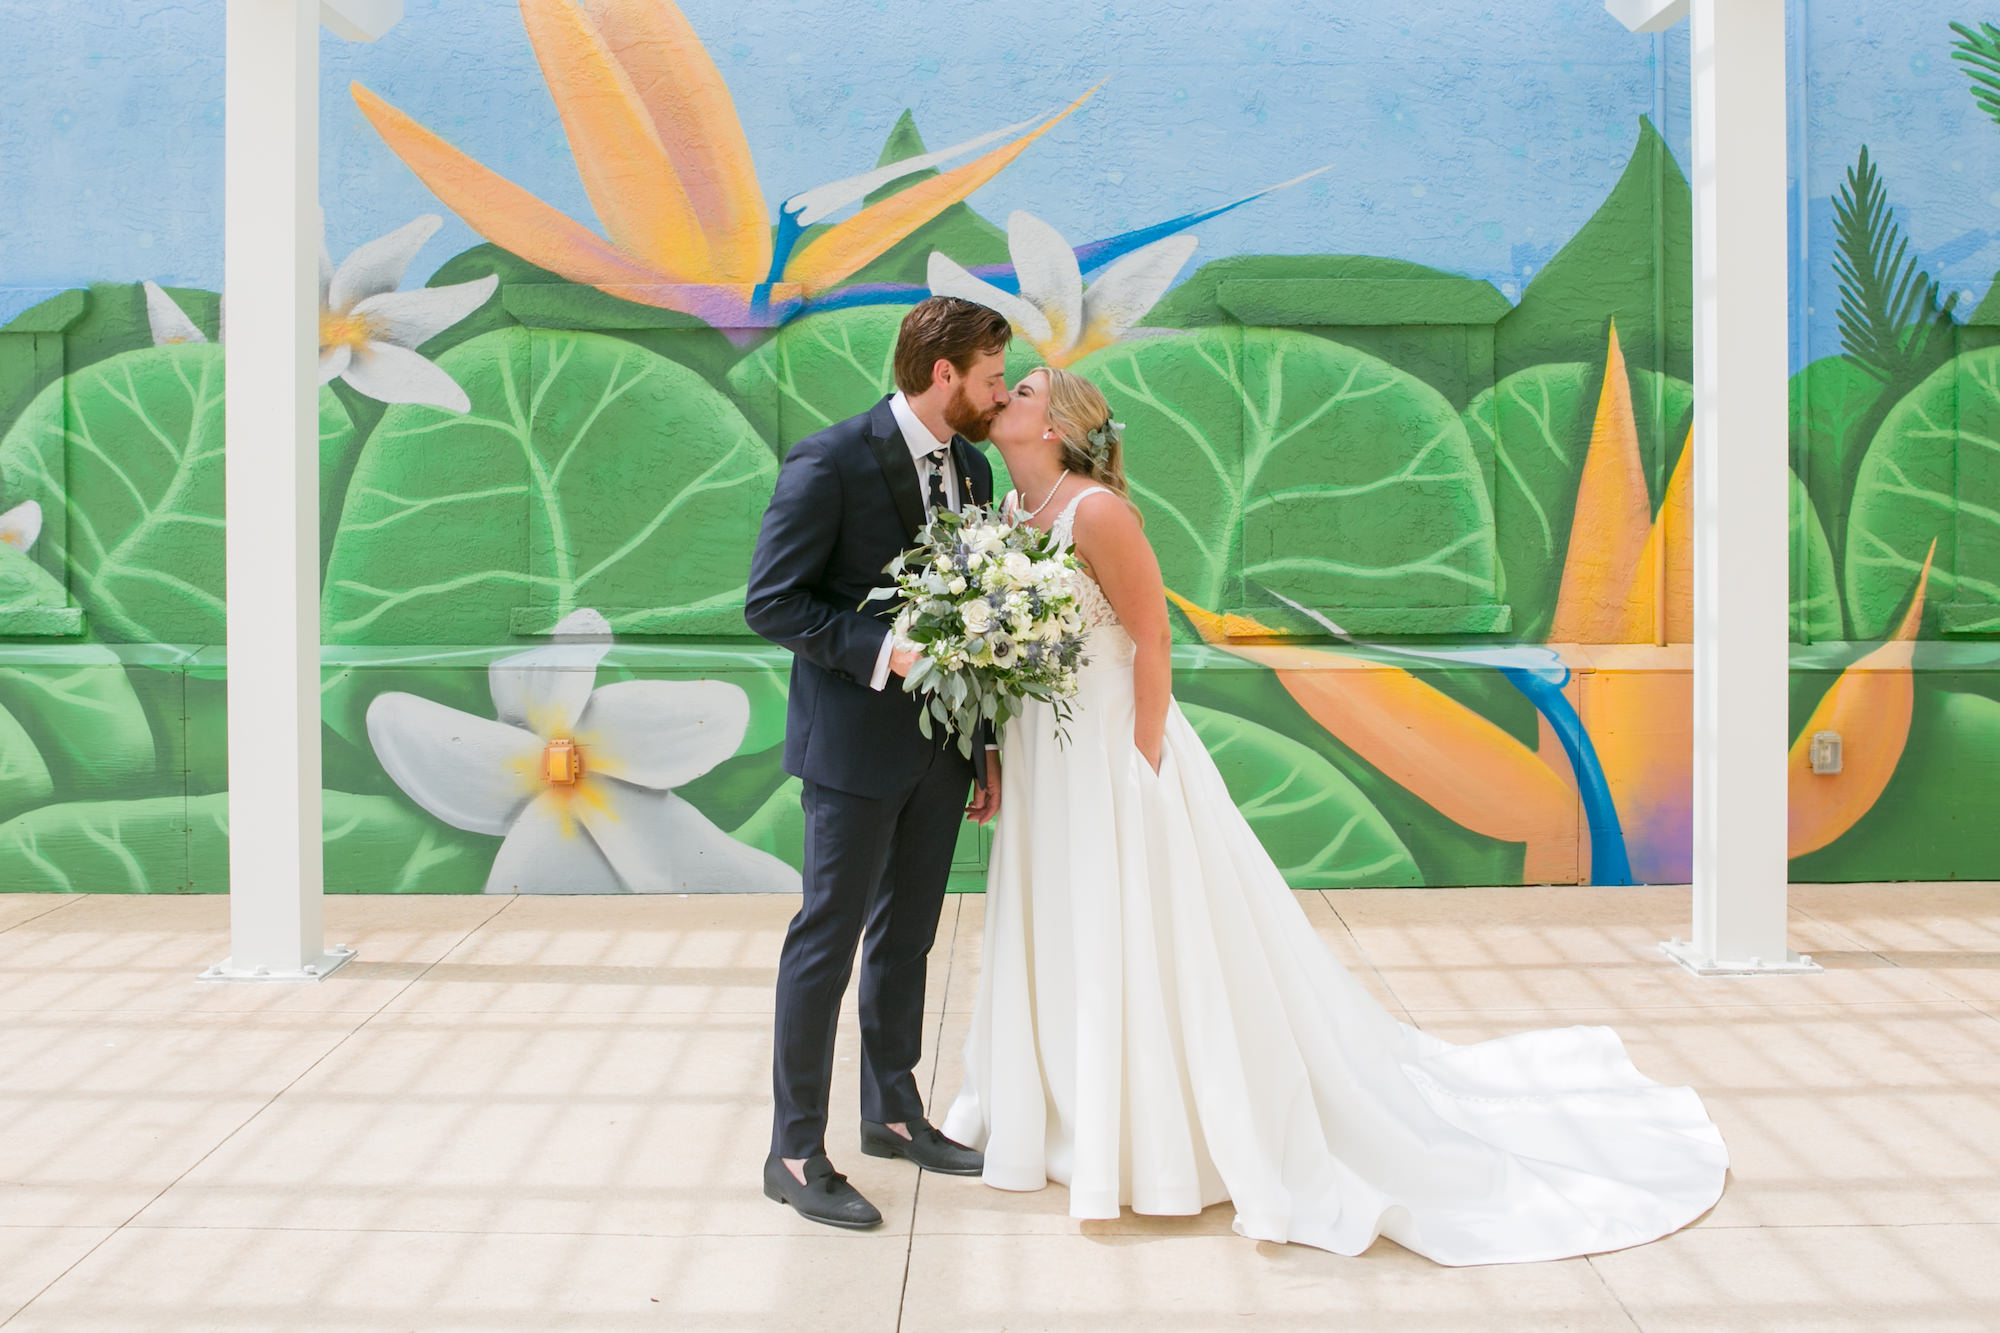 Bride and Groom Wedding Portrait in Front Mural | St. Pete Photographer Carrie Wildes Photography of